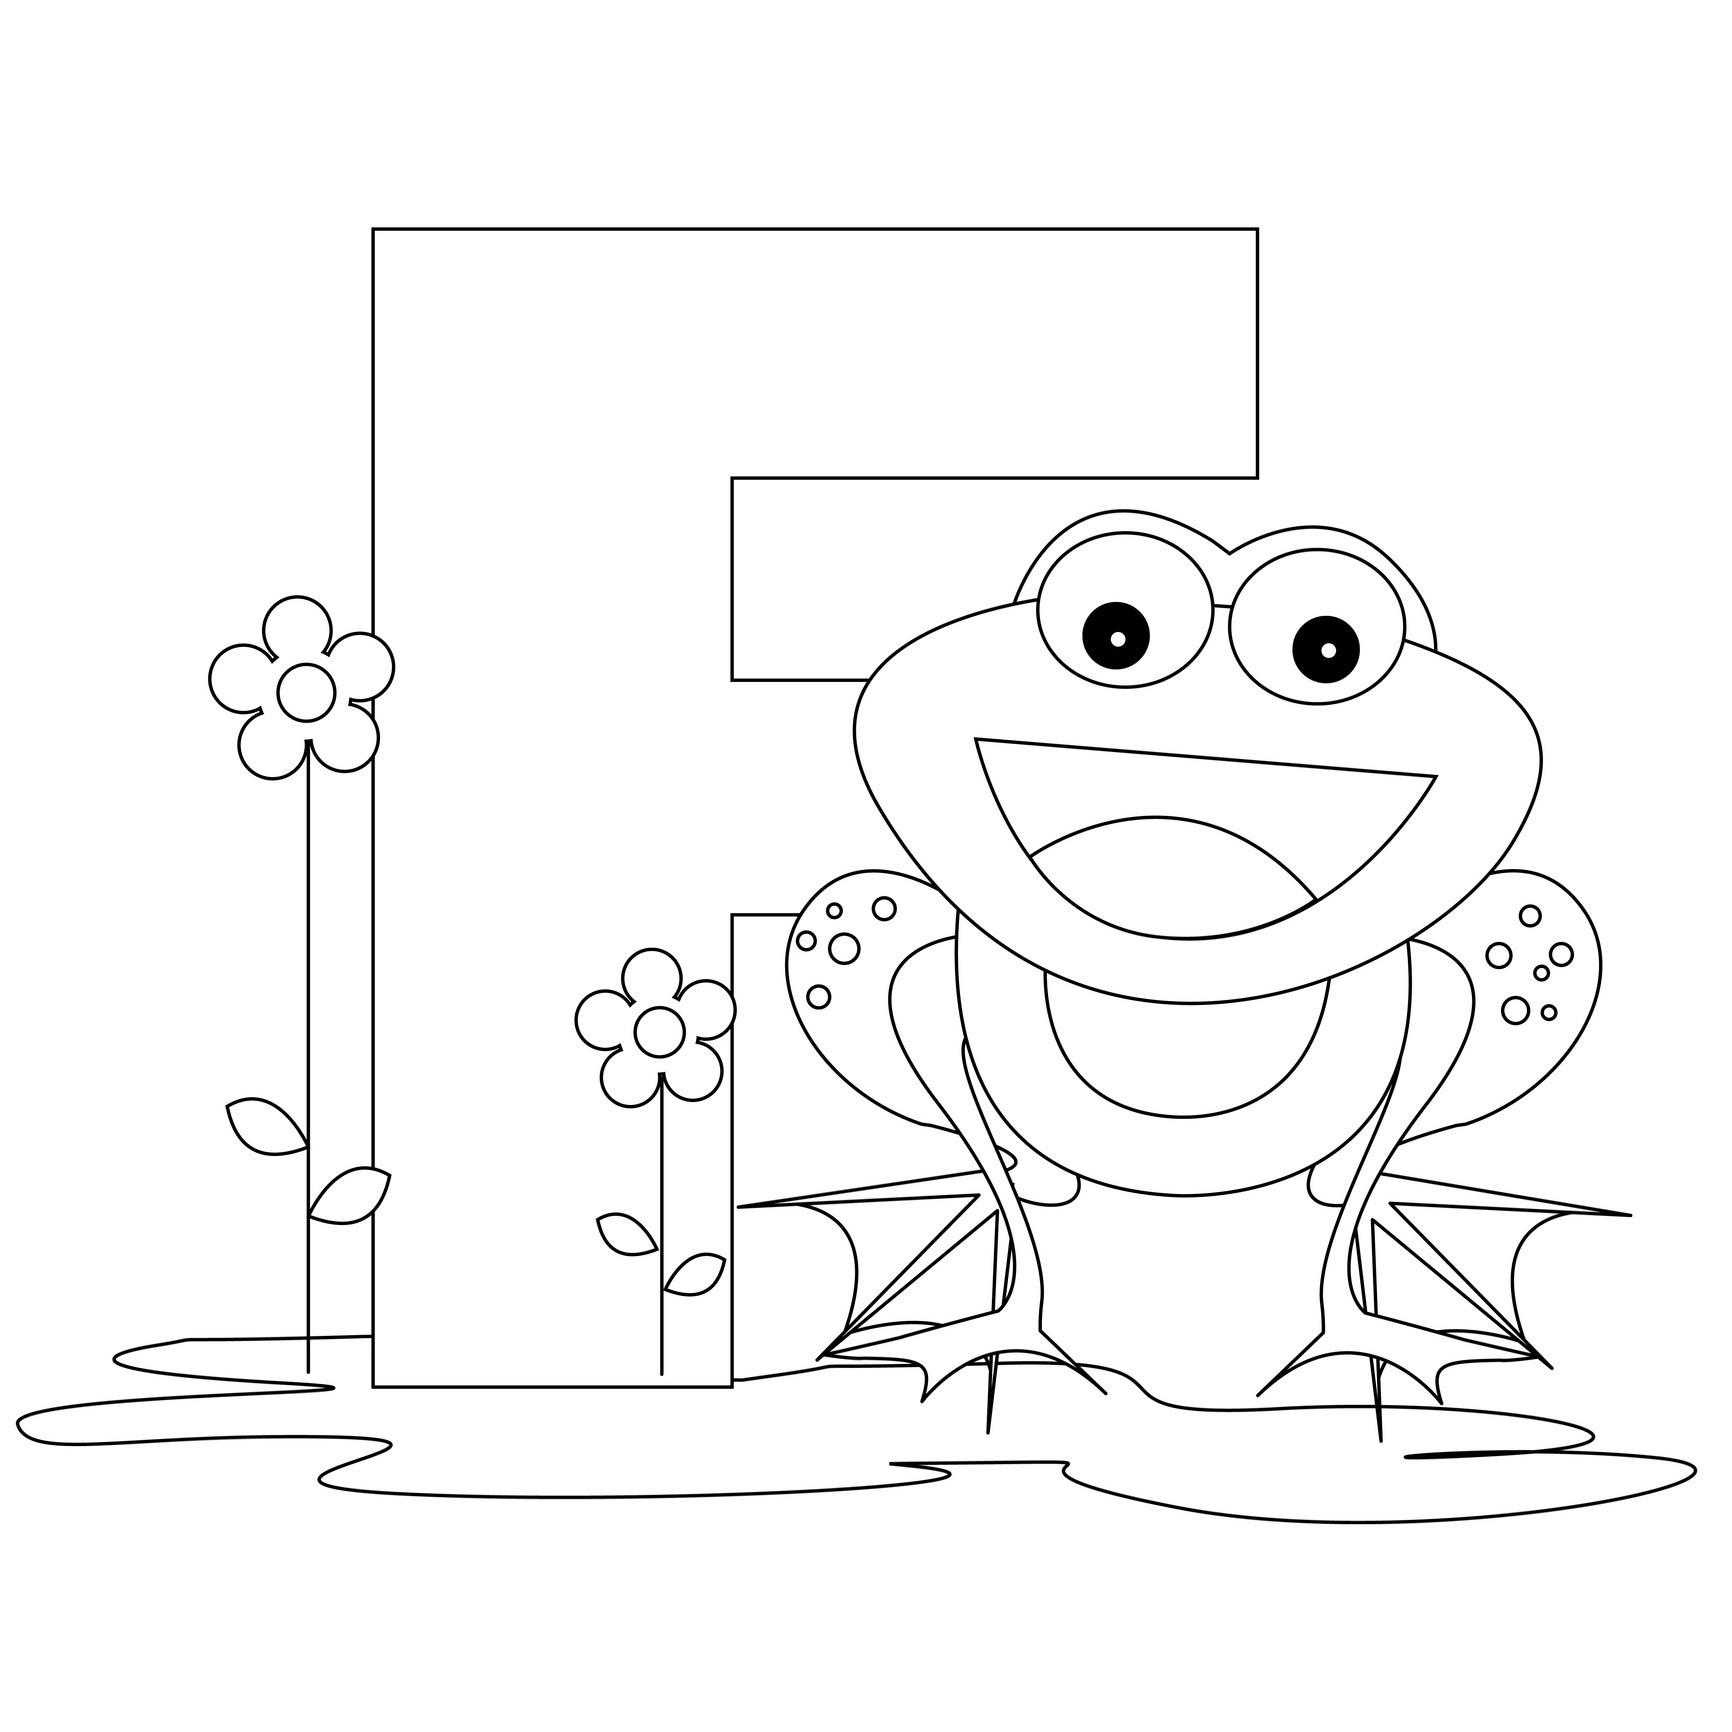 Letter F Preschool Coloring Sheets
 Free Printable Alphabet Coloring Pages for Kids Best